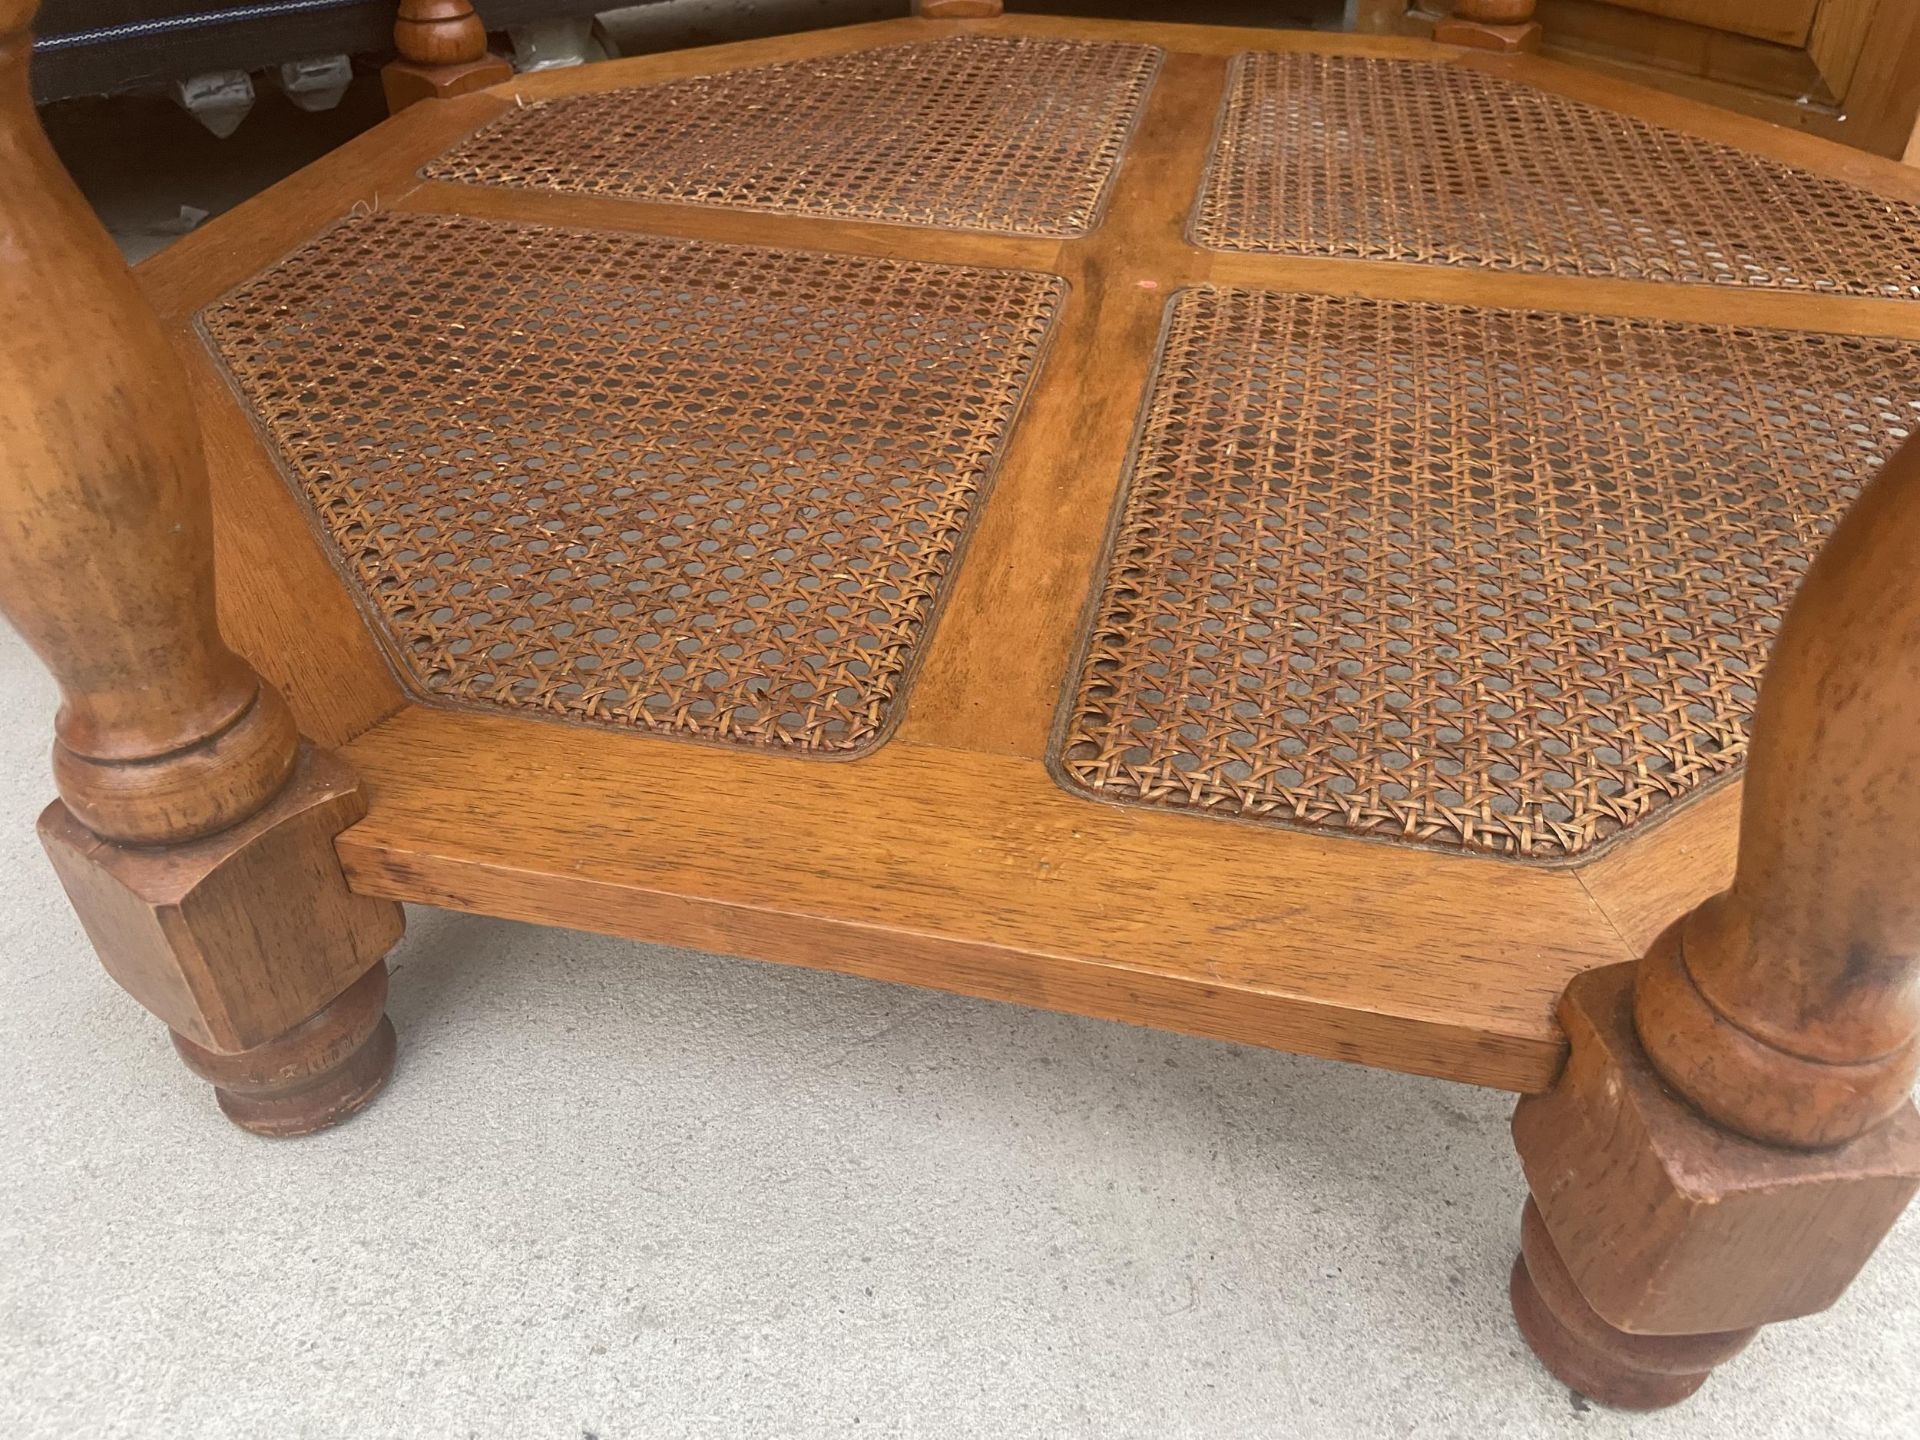 A MODERN OCTAGANOL TWO TIER COFFEE TABLE WITH INSET GLASS TOP AND CANE UNDER TIER 40" ACROSS - Image 3 of 3